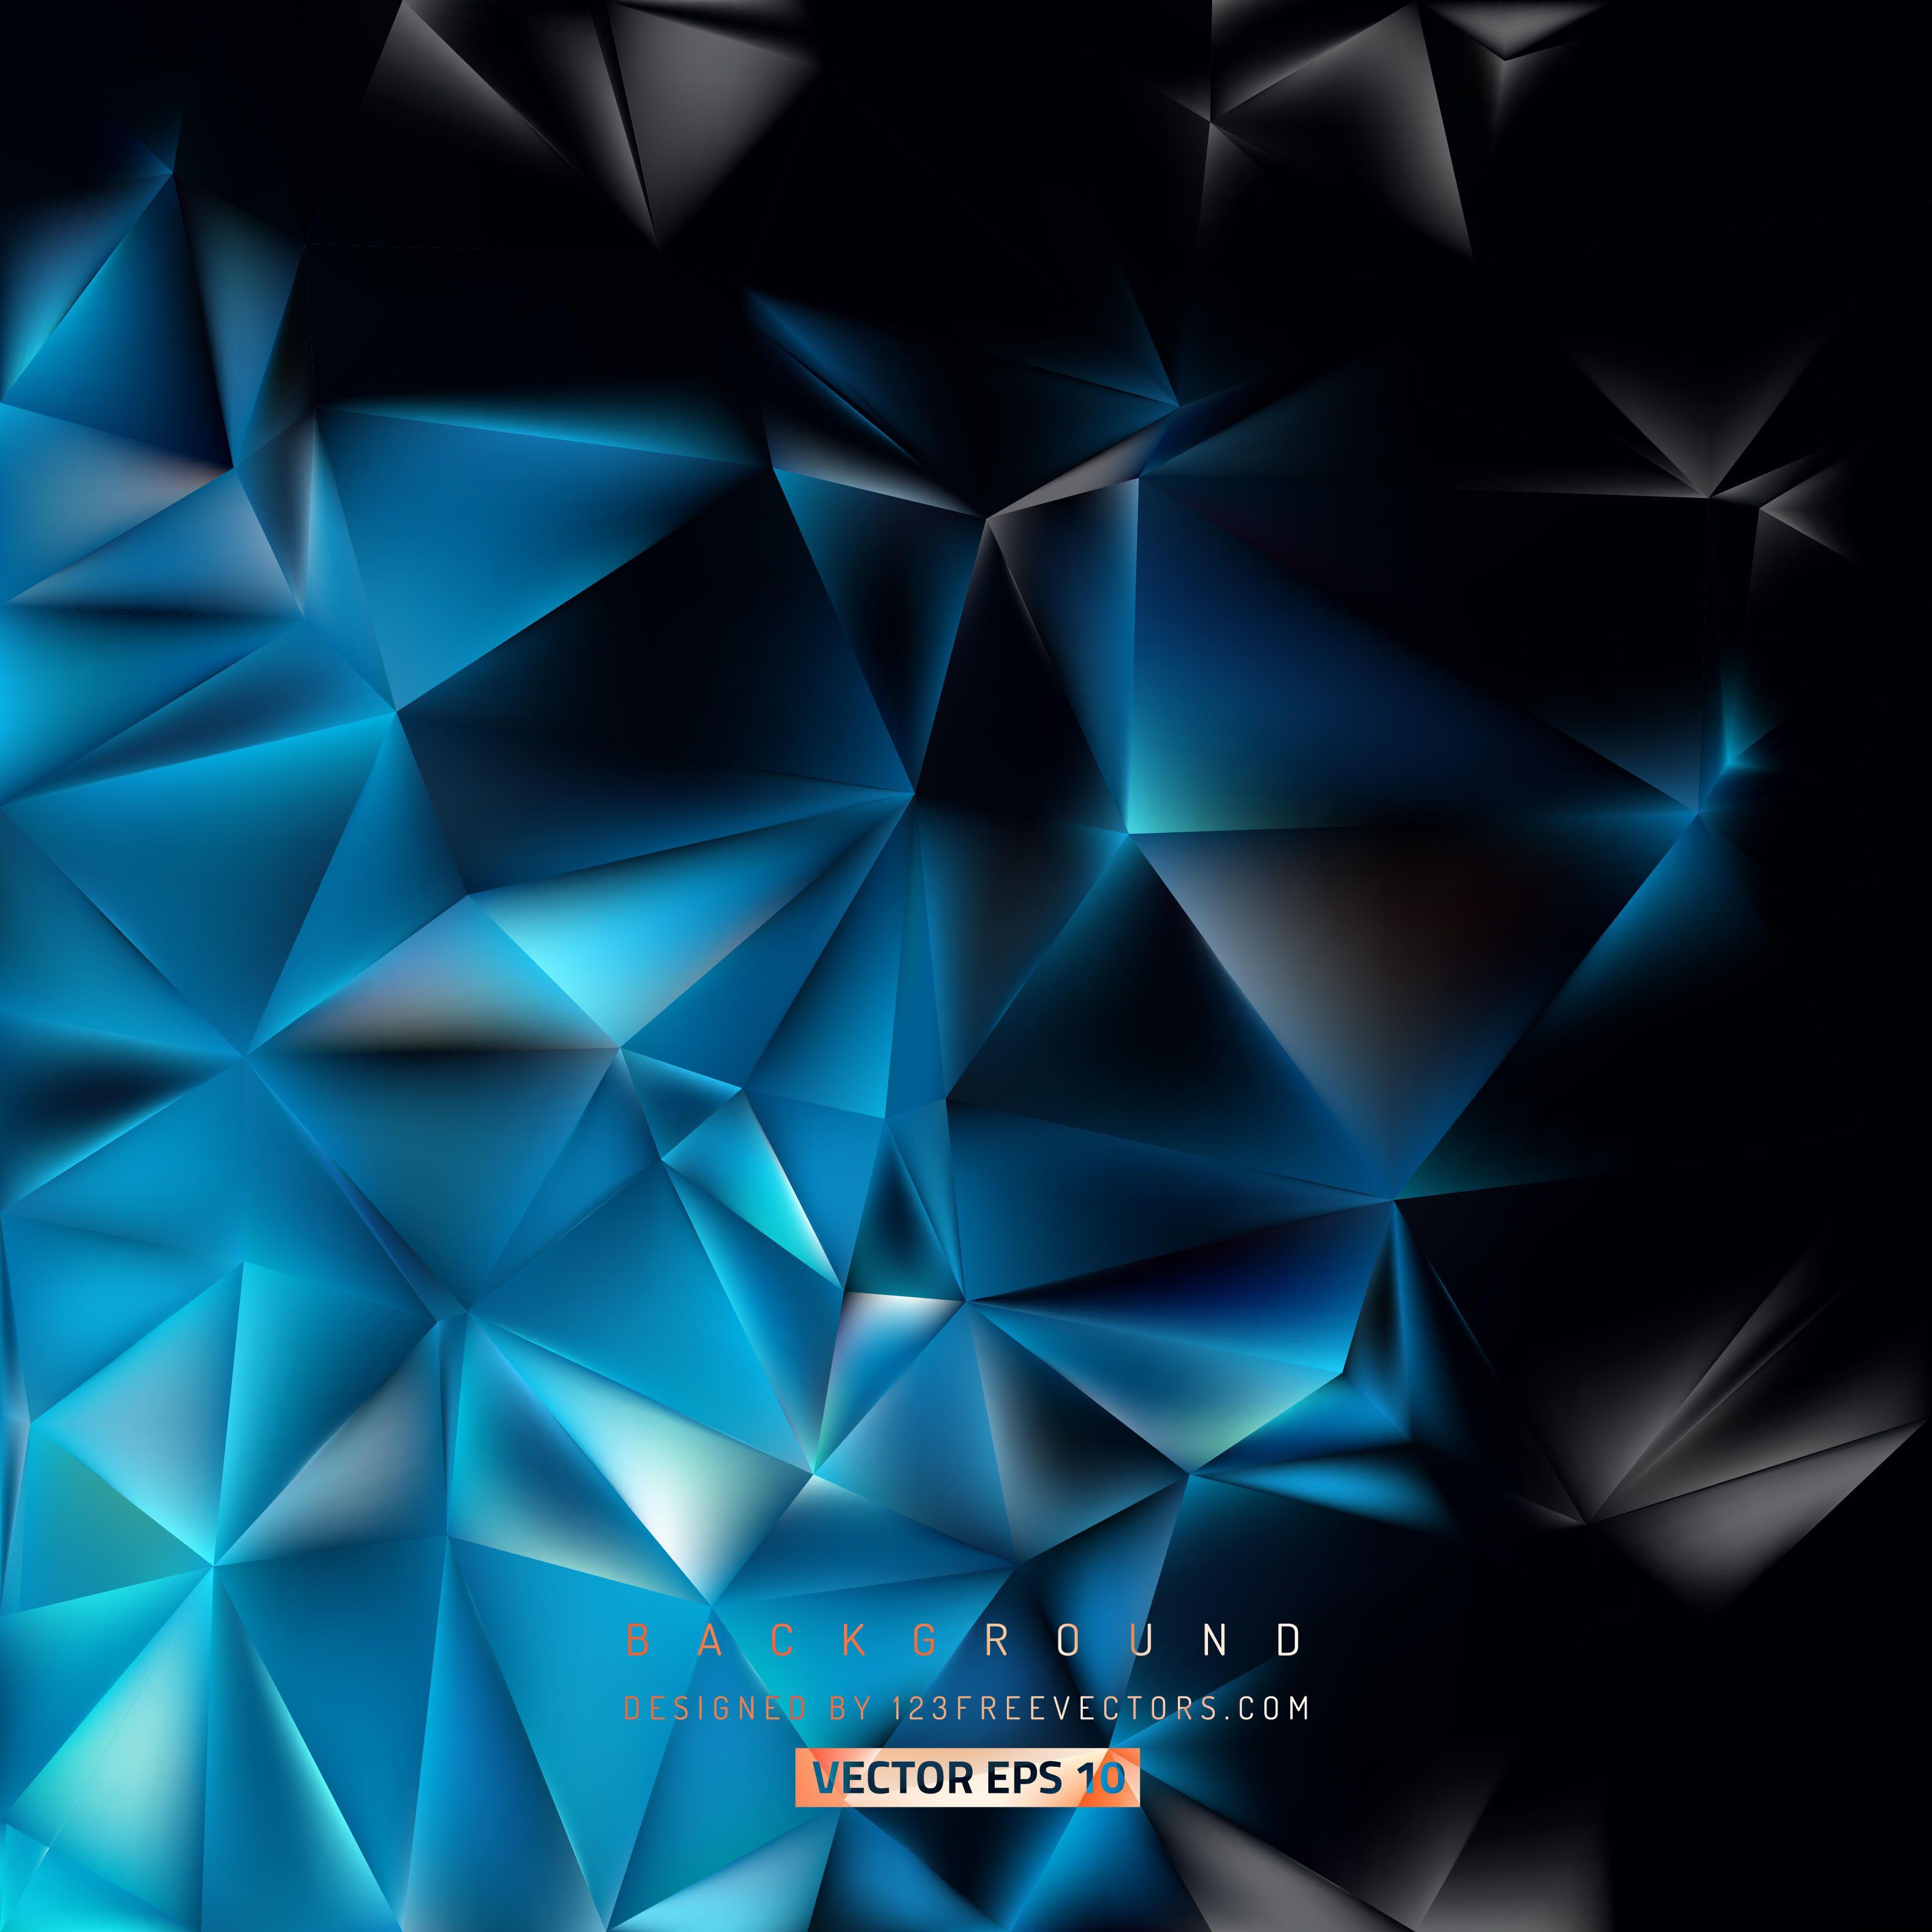 Blue Black Polygon Triangle BackgroundFreevectors